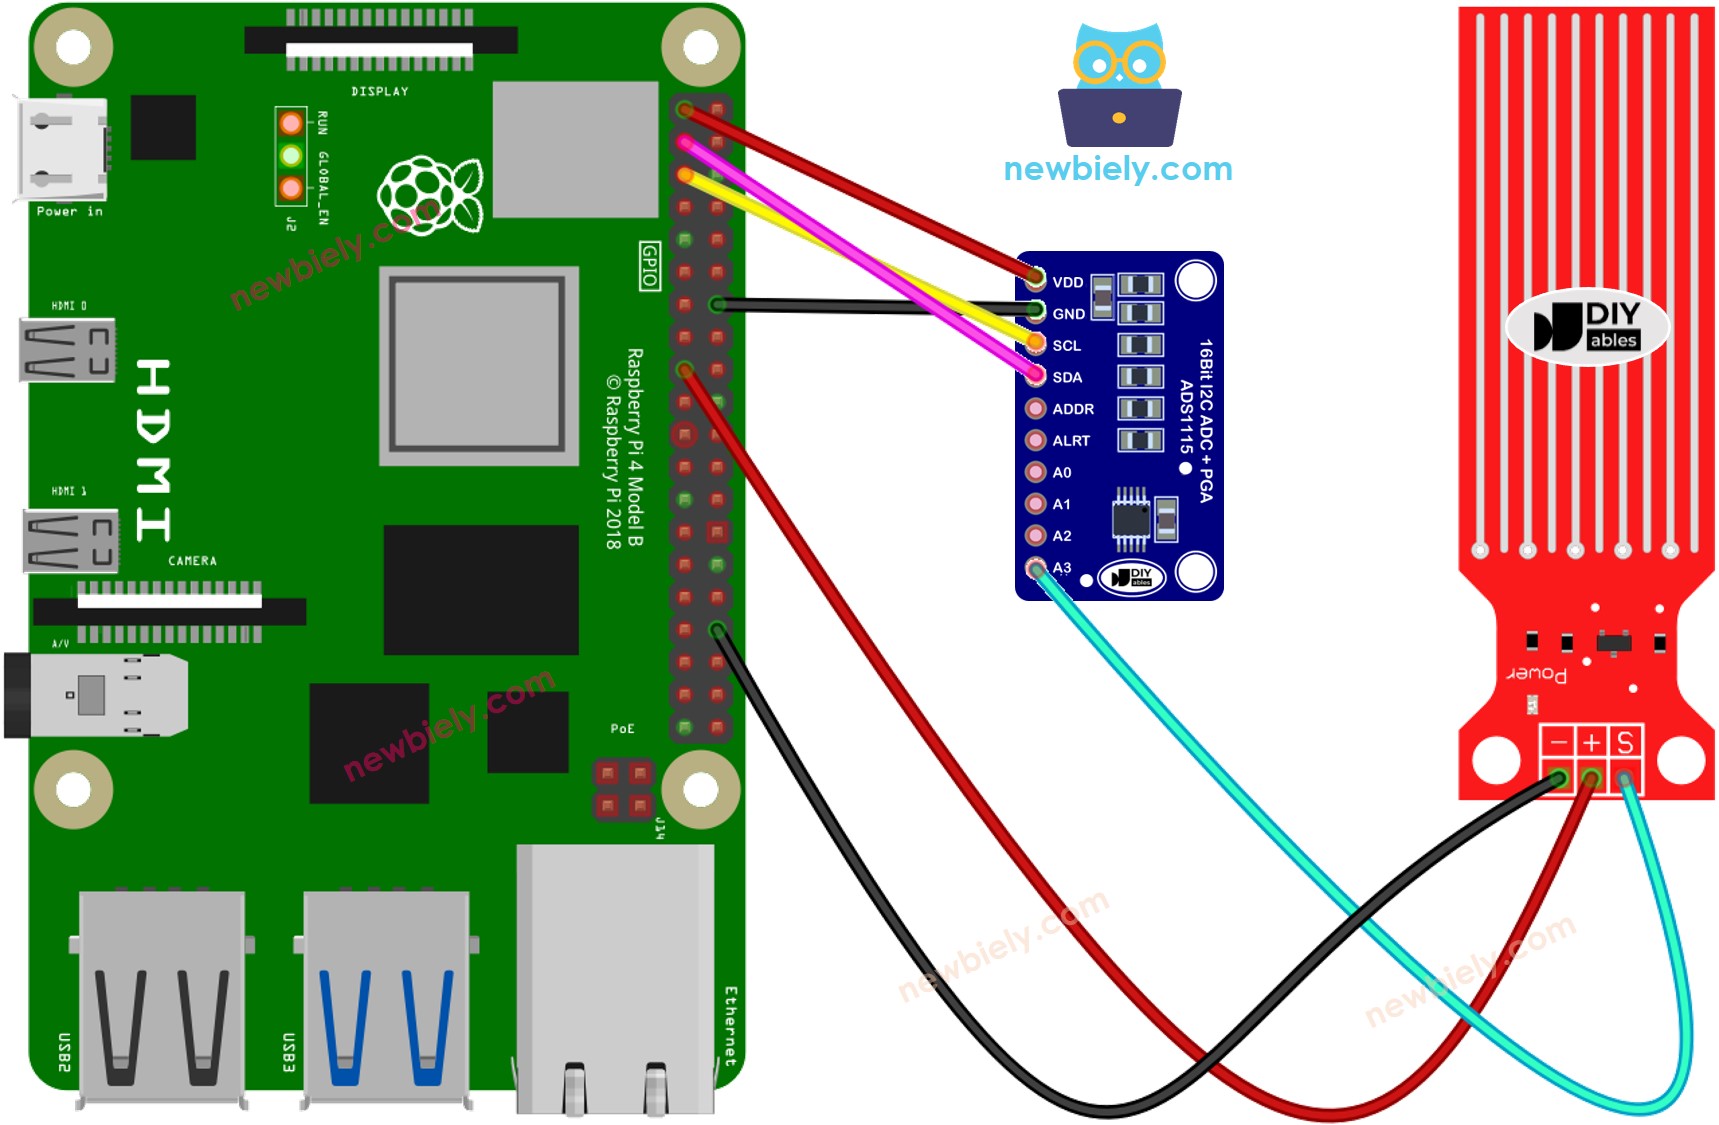 The wiring diagram between Raspberry Pi and Water Sensor